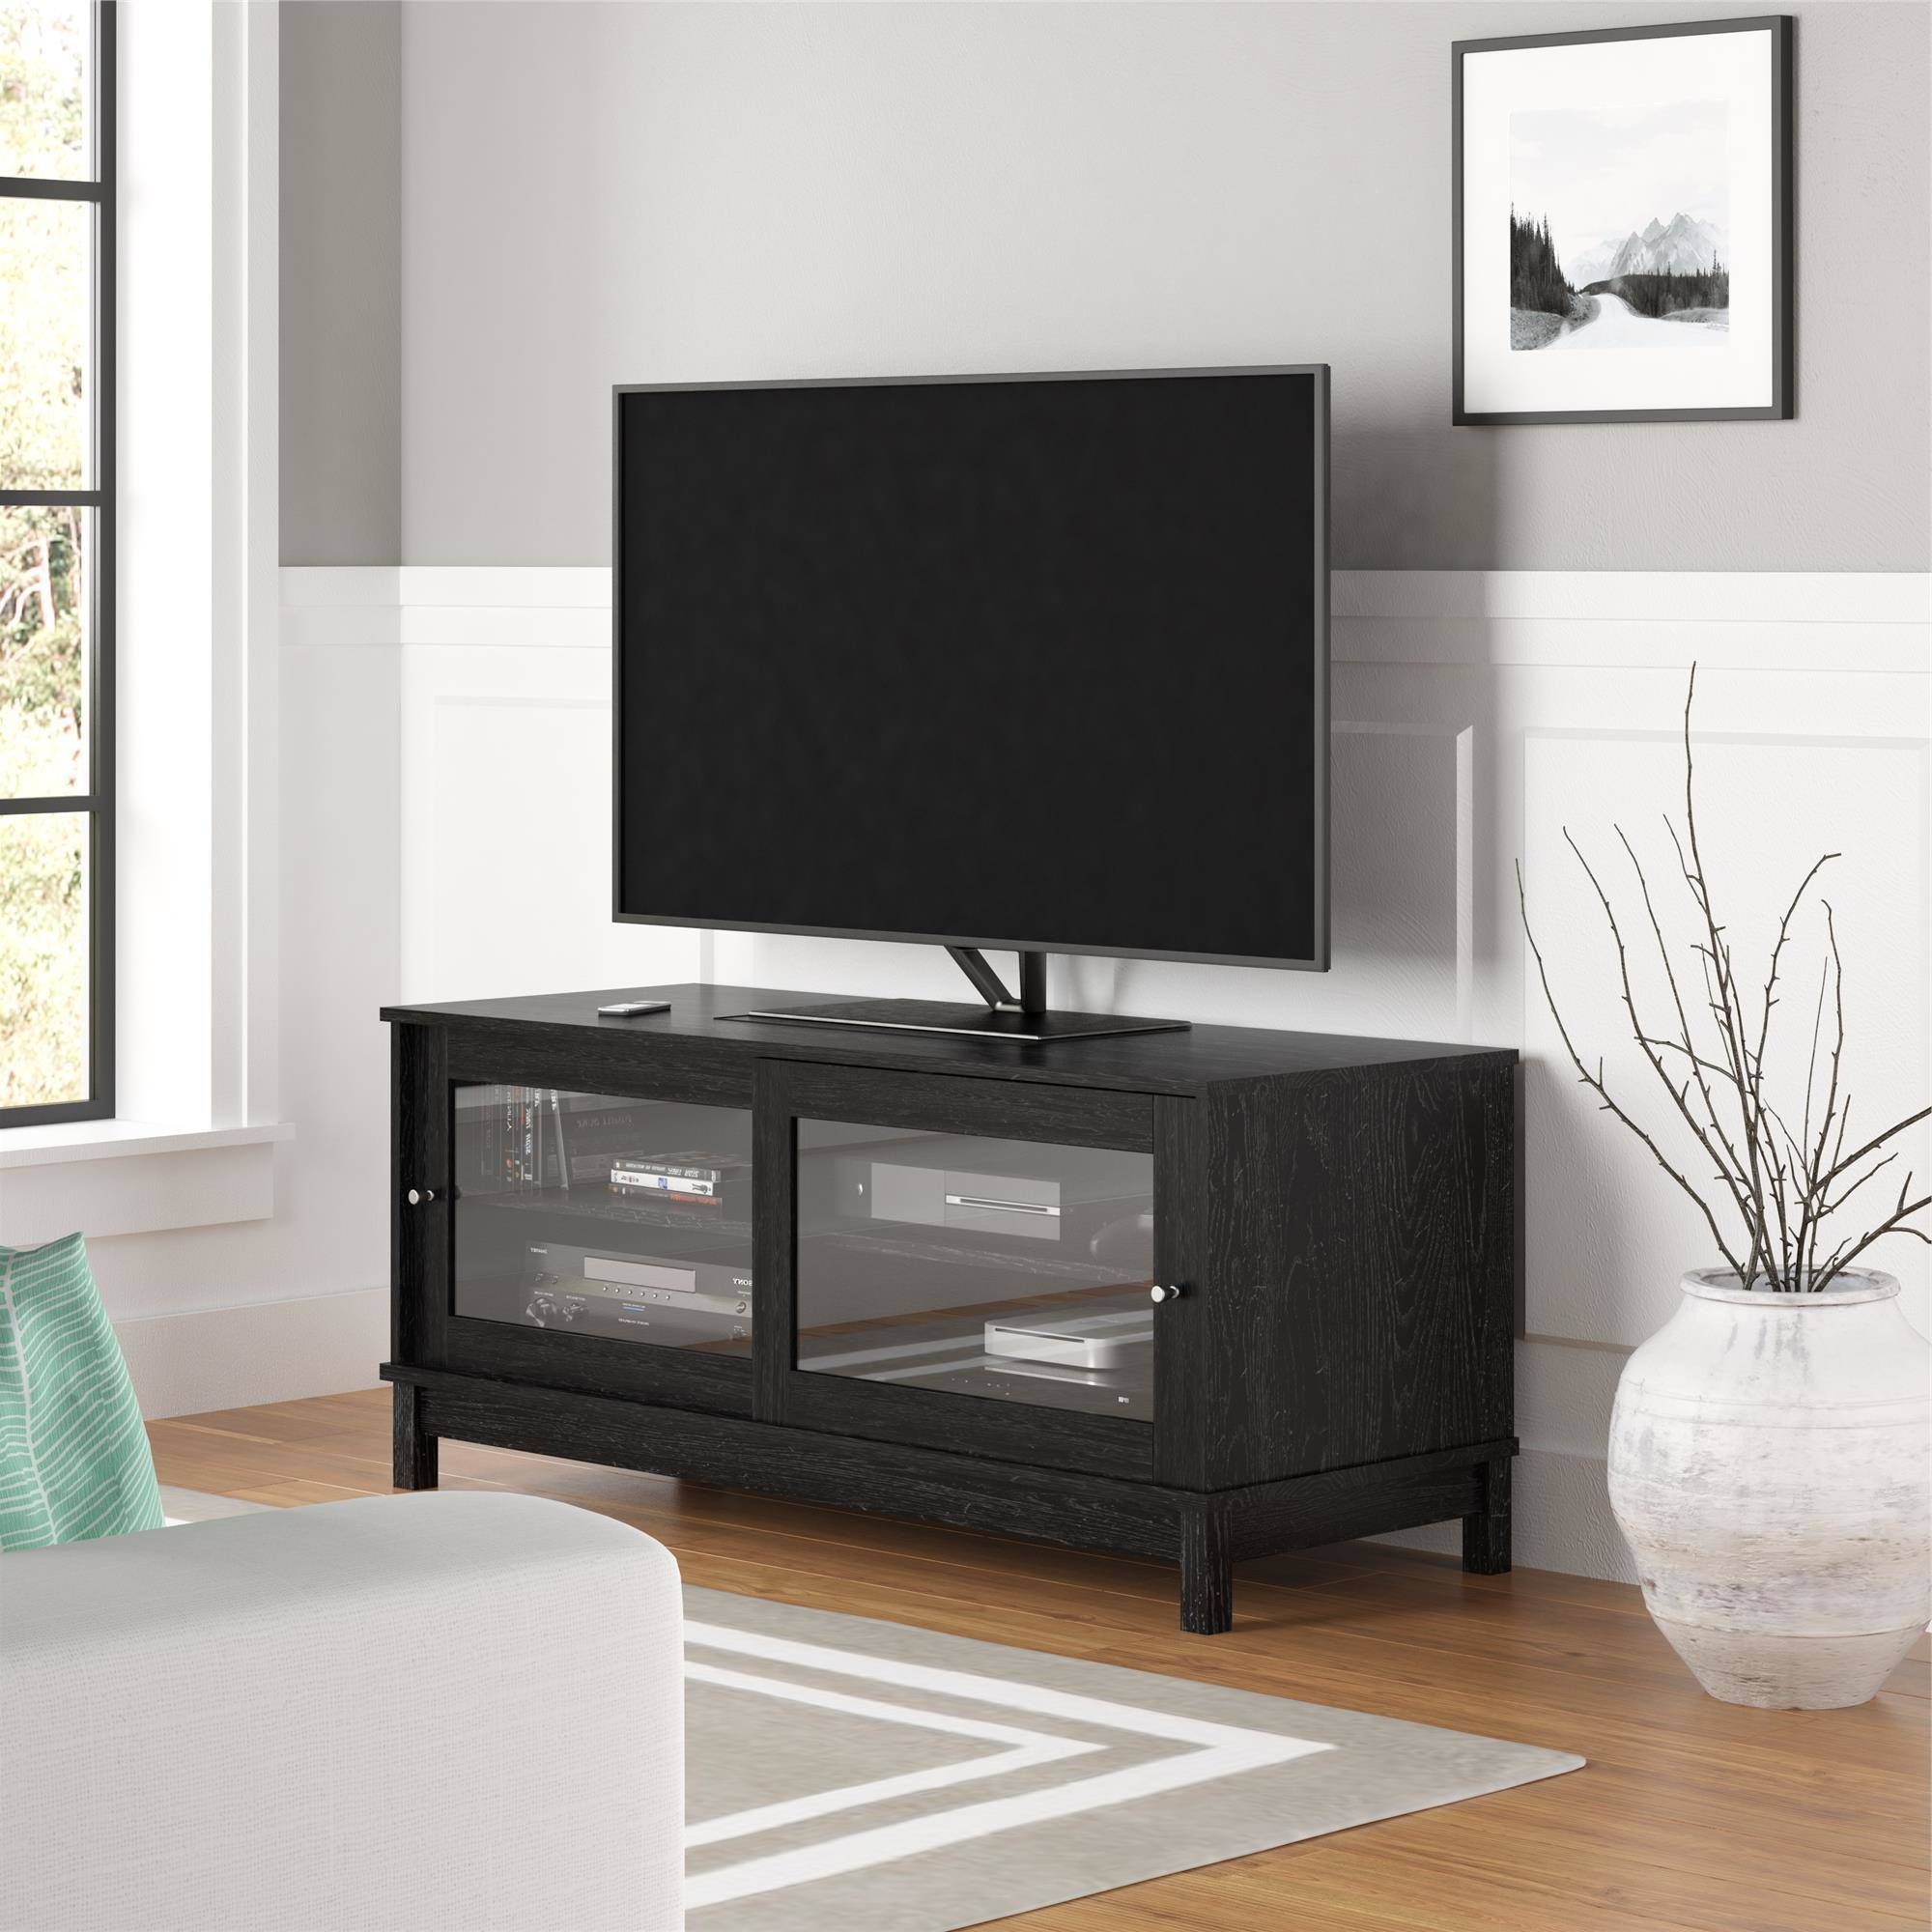 Home Entertainment Center Tv Stand Media Storage With Throughout Modern Sliding Door Tv Stands (View 14 of 20)